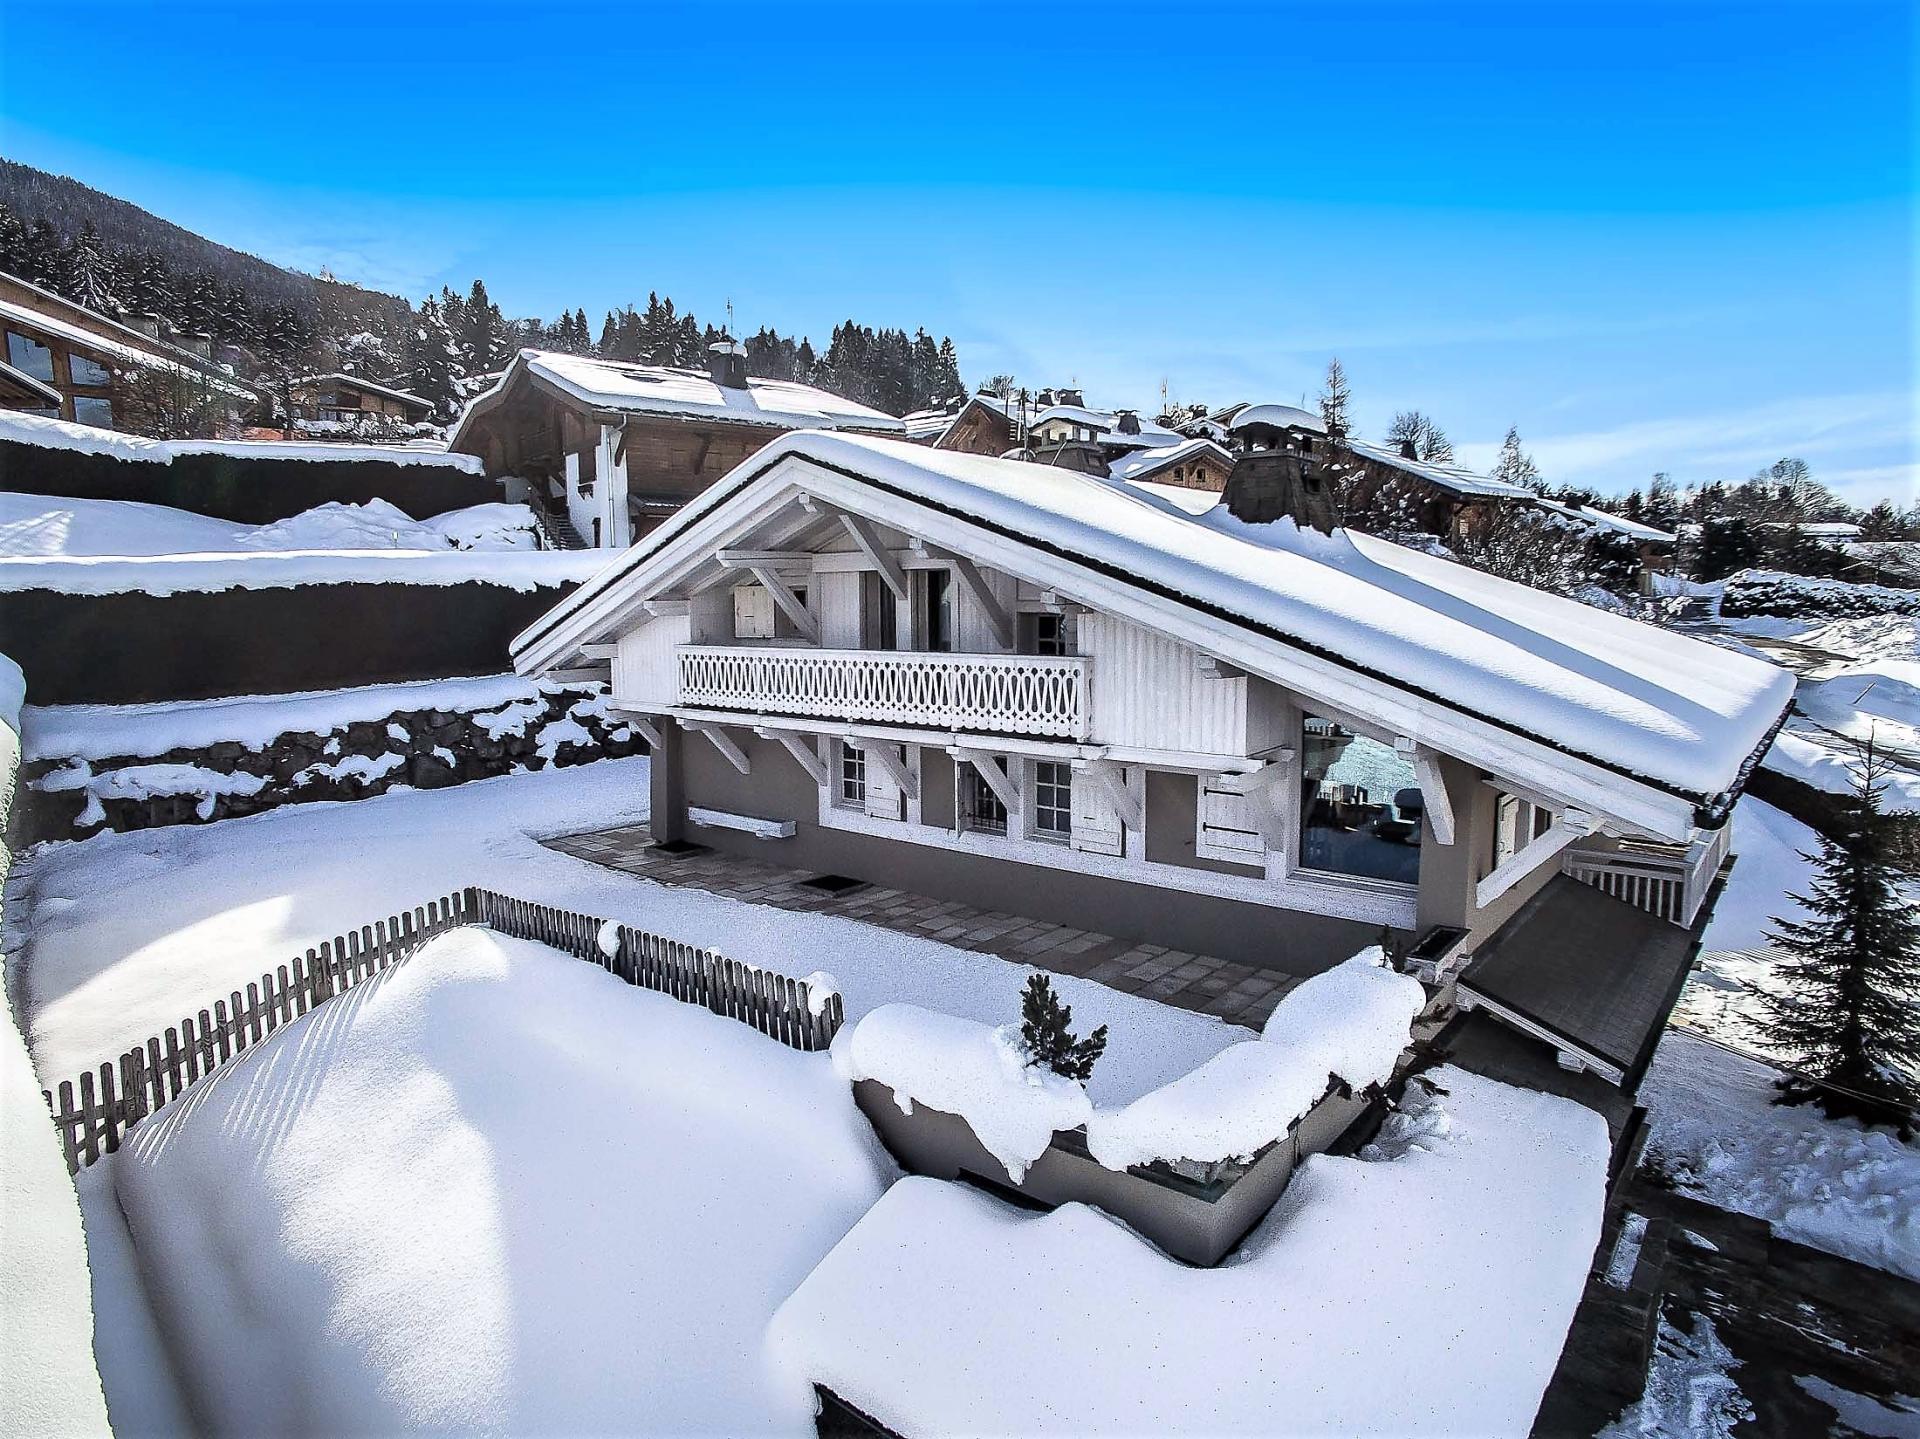 A BEAUTIFUL CHALET TO RENT FOR YOUR SKI HOLIDAY IN THE FRENCH ALPS